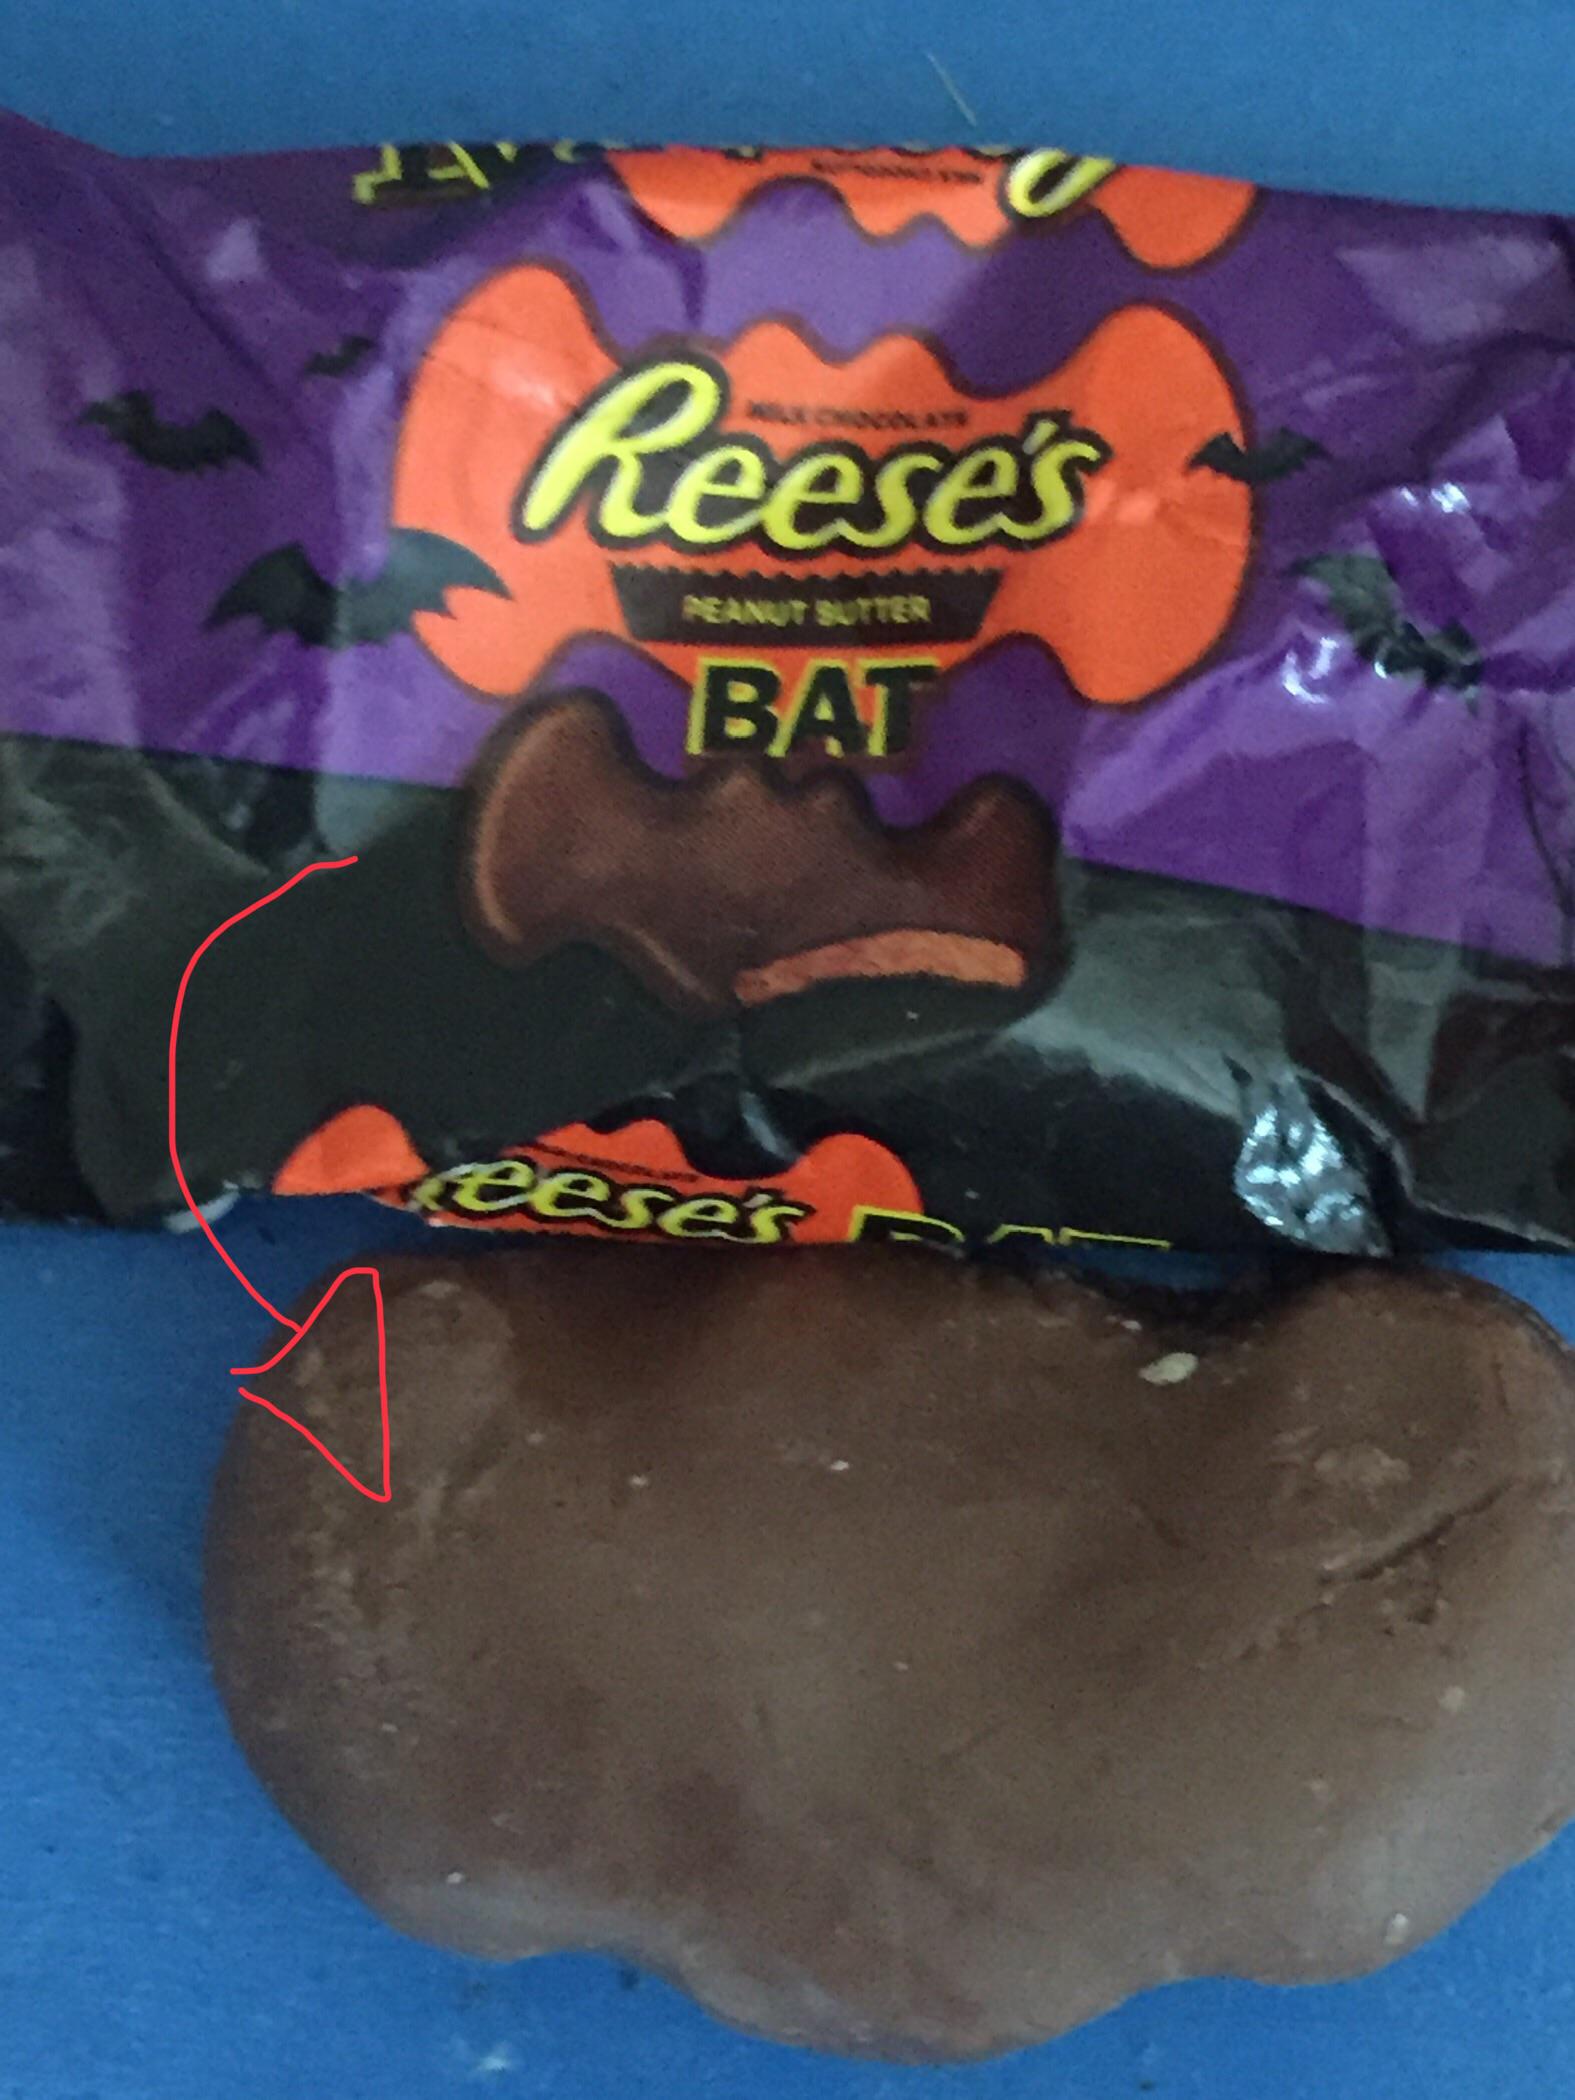 Expectation vs. Reality - reese's peanut butter cups Bat